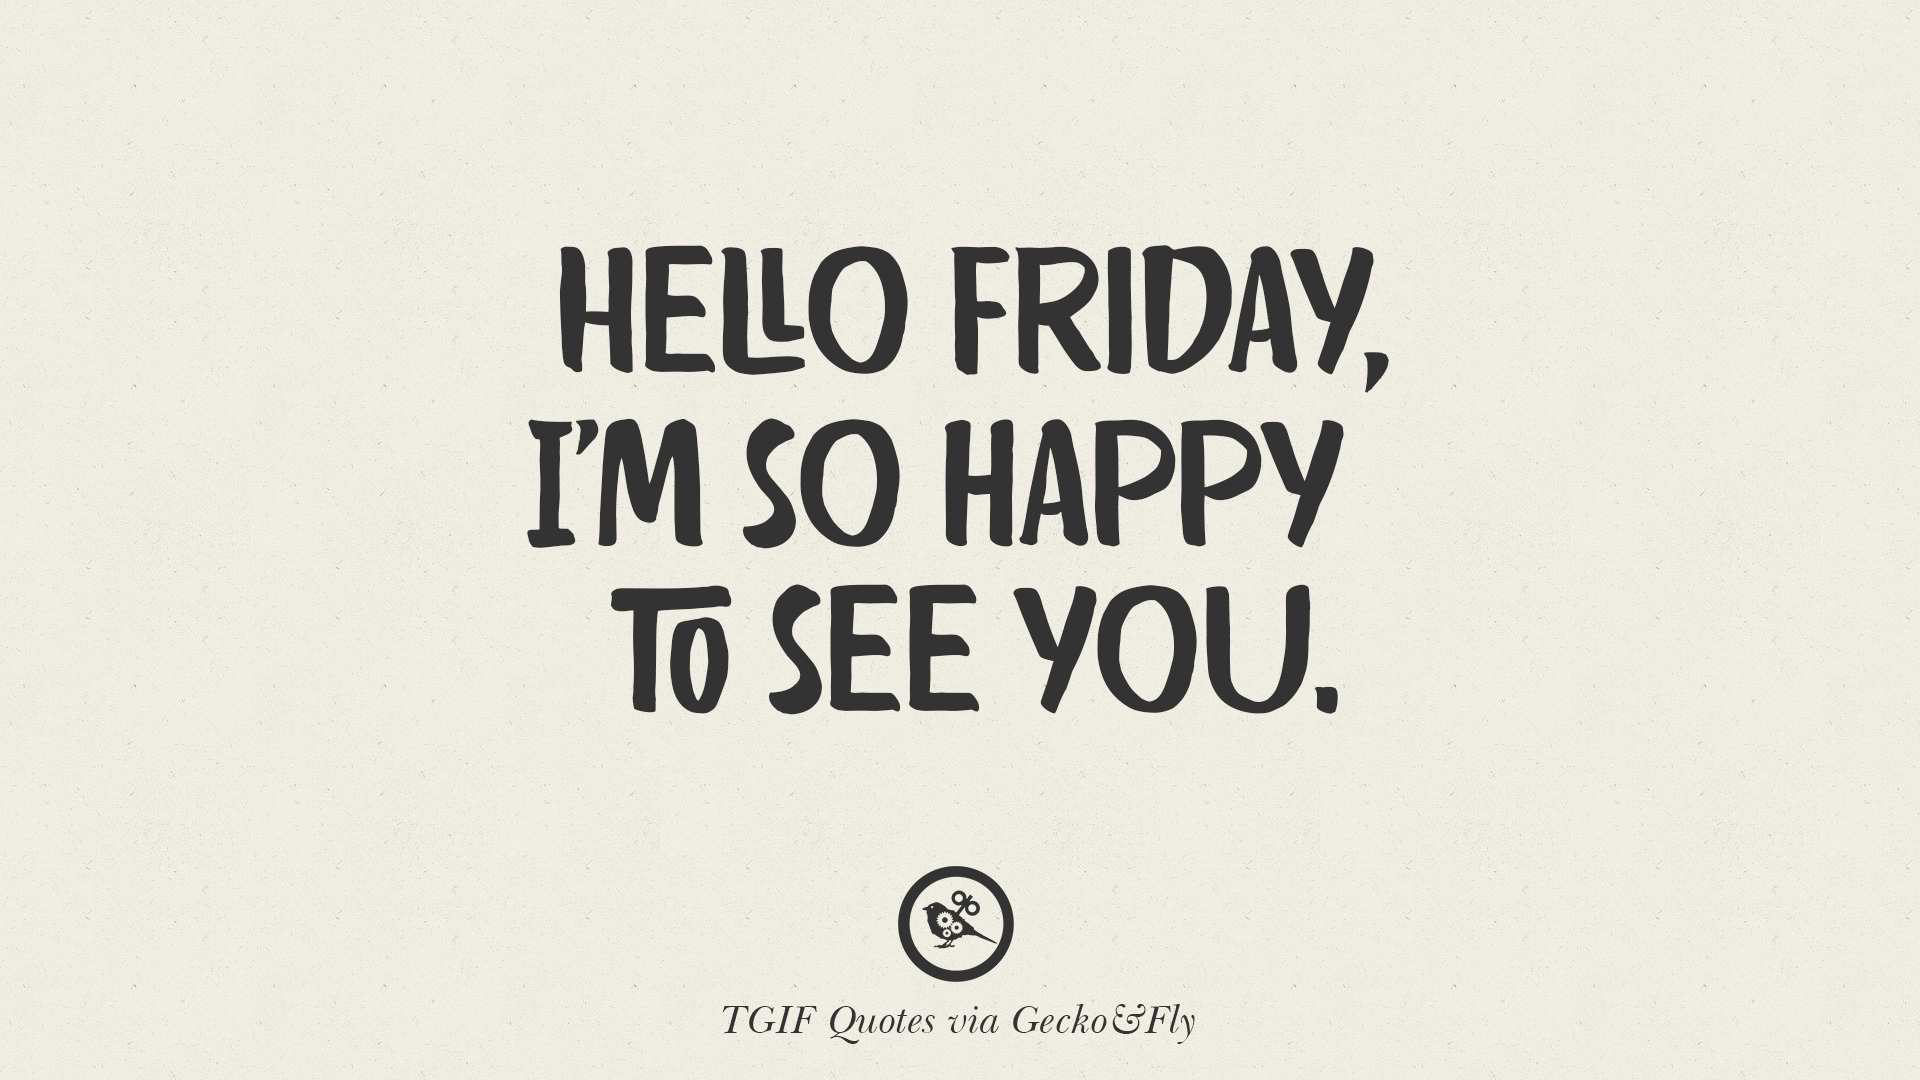 20 TGIF  Thank God It's Friday  Meme Quotes & Messages